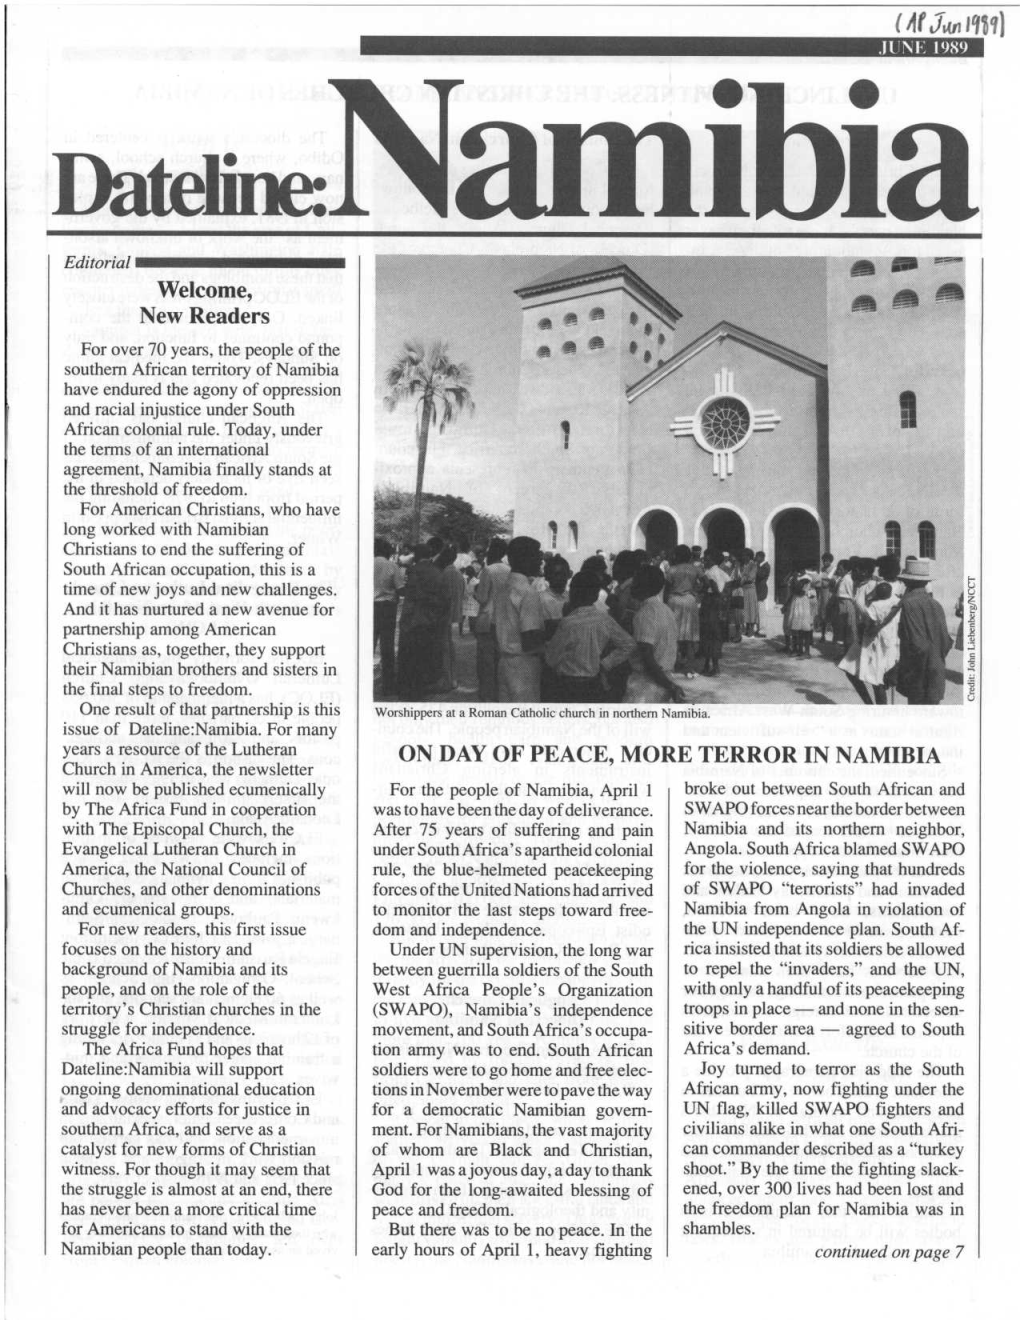 ON DAY of PEACE, MORE TERROR in NAMIBIA Welcome, New Readers